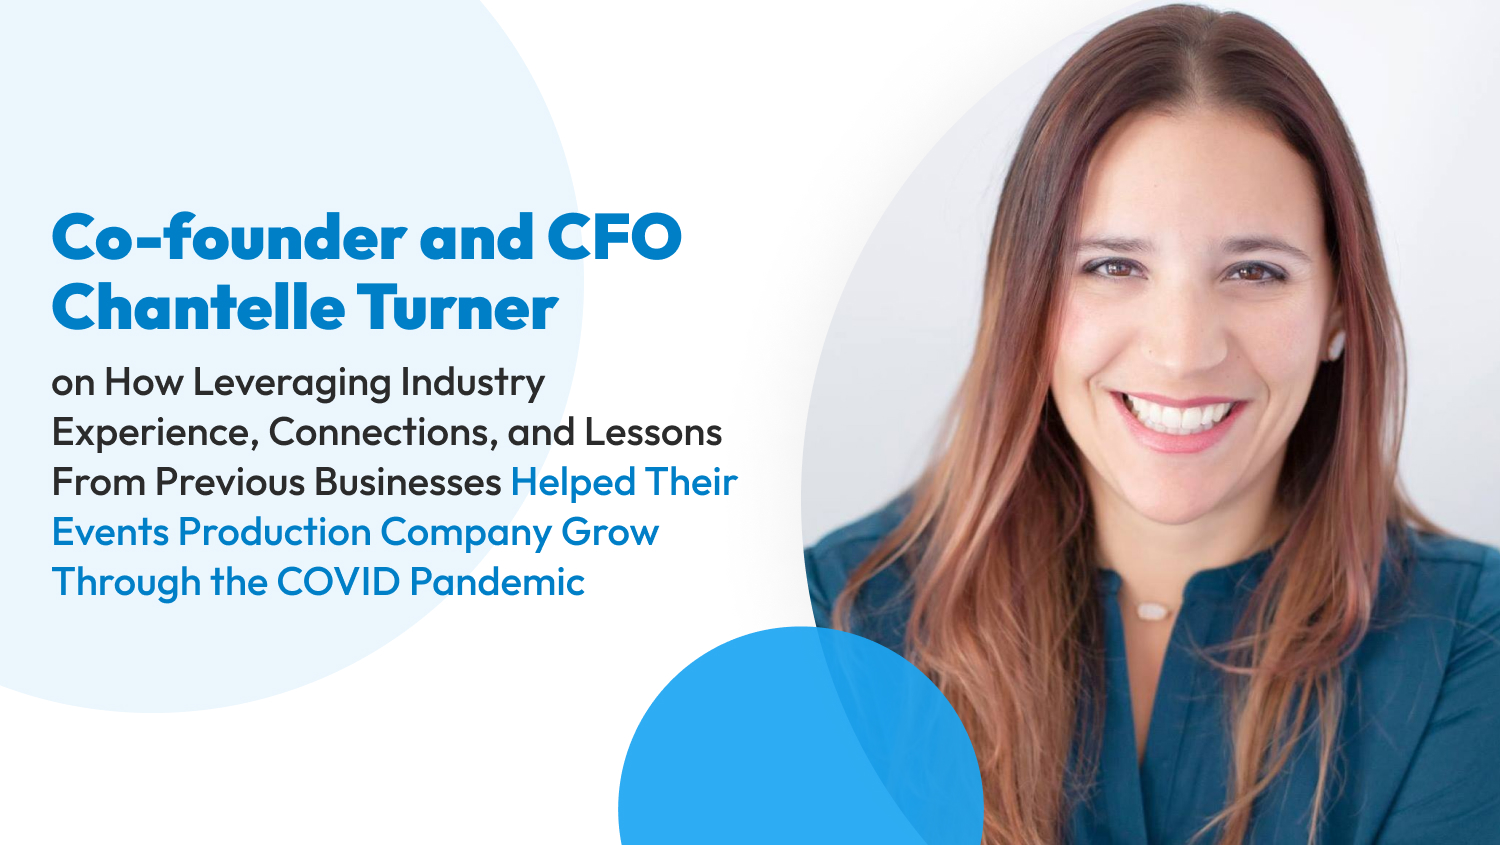 Co-founder and CFO Chantelle Turner